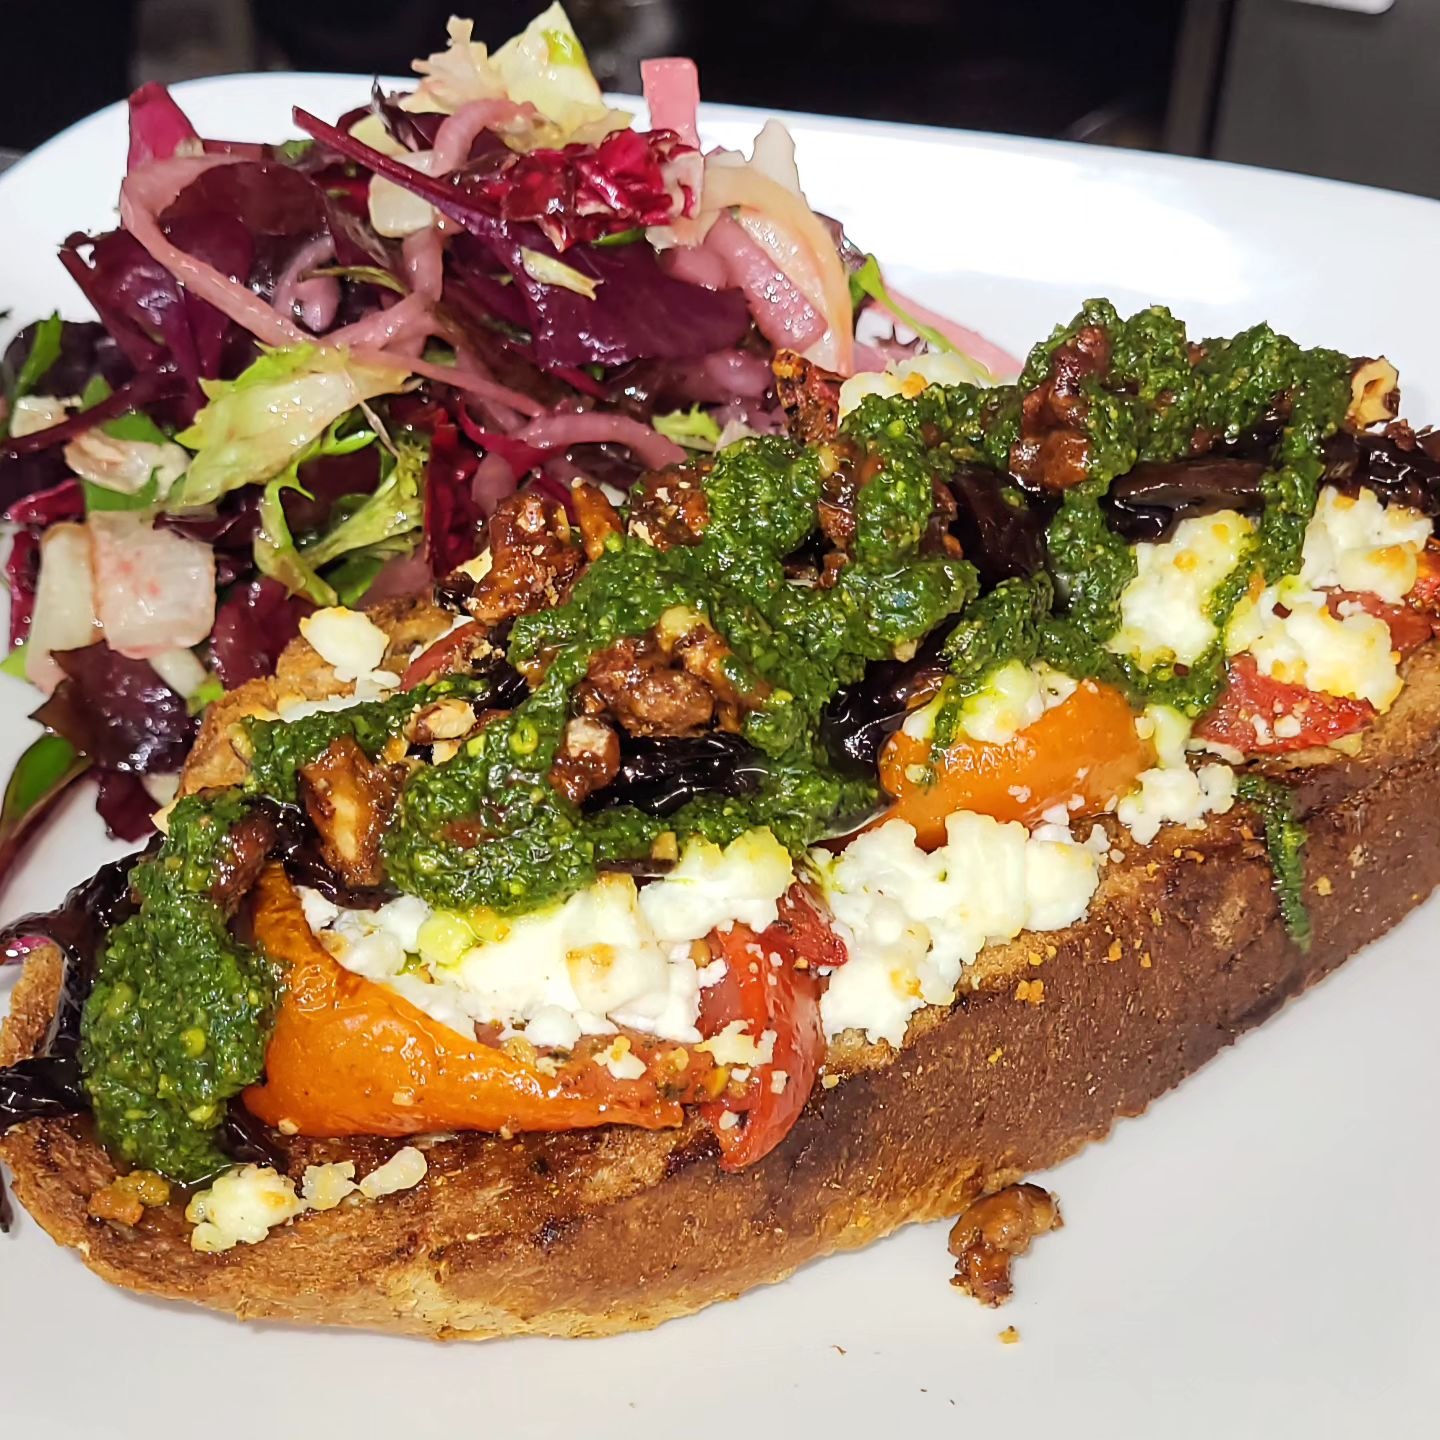 Break up your day with a satisfying lunch the Terrace. 
Delicious food, guaranteed to boost your mood! 

Our Walnut &amp; Date Loaf
- Caramelised Goats Cheese
- Sundried Tomatoes
- Toasted Walnuts
- Ellan Farm Herb Pesto
- Balsamic Glaze
- Fresh Bake